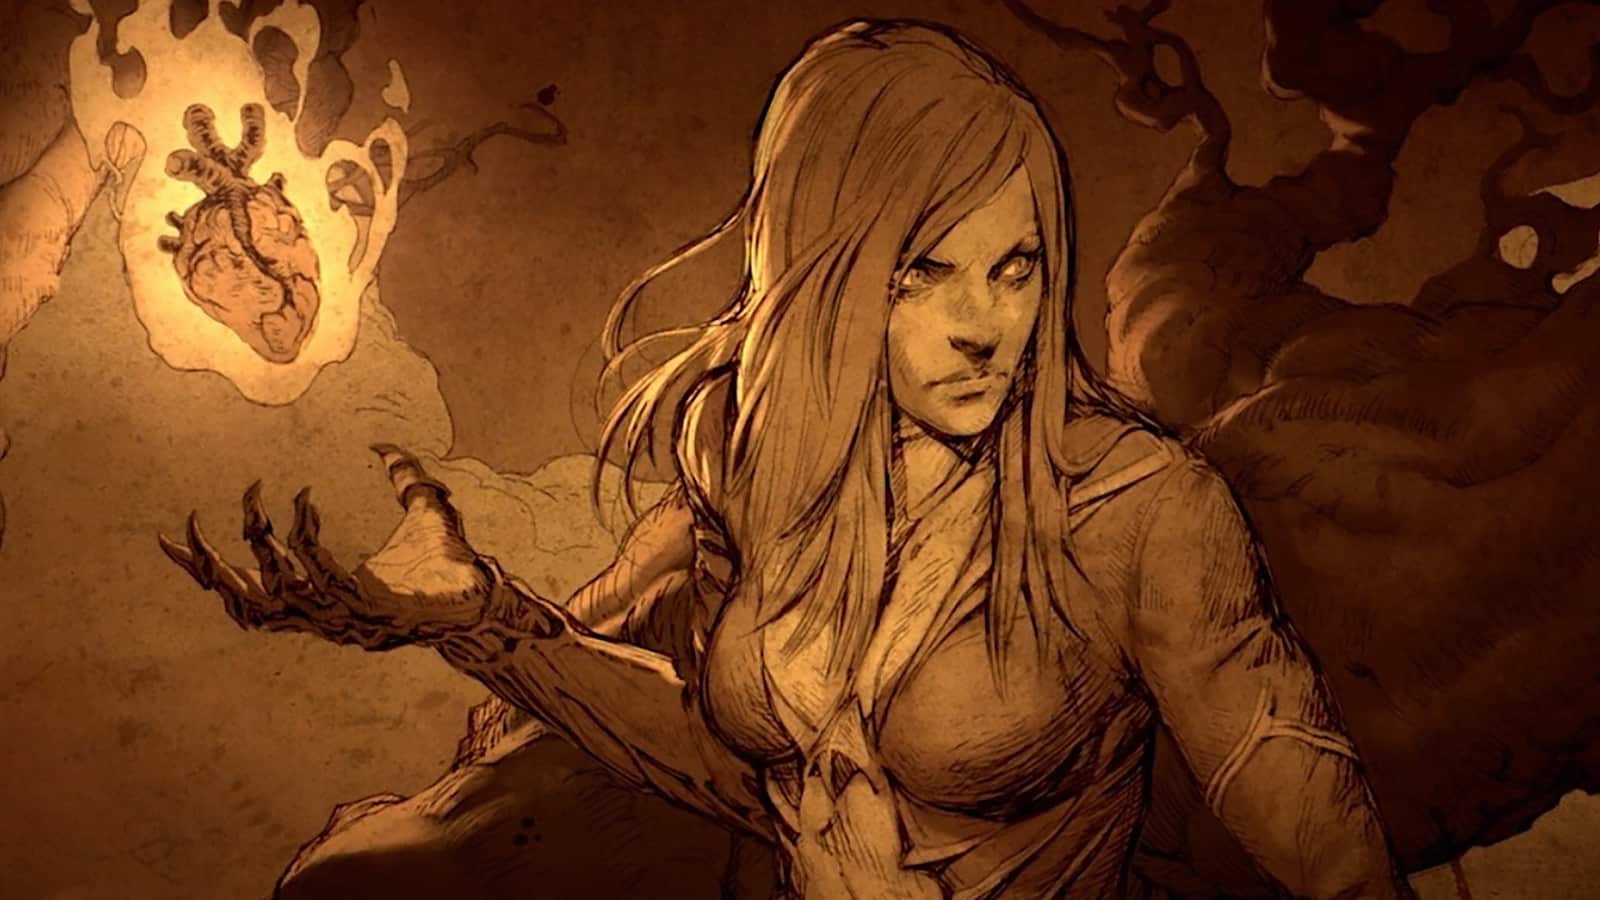 Artwork of Diablo 3's female Necromancer holding a flaming heart phylactery